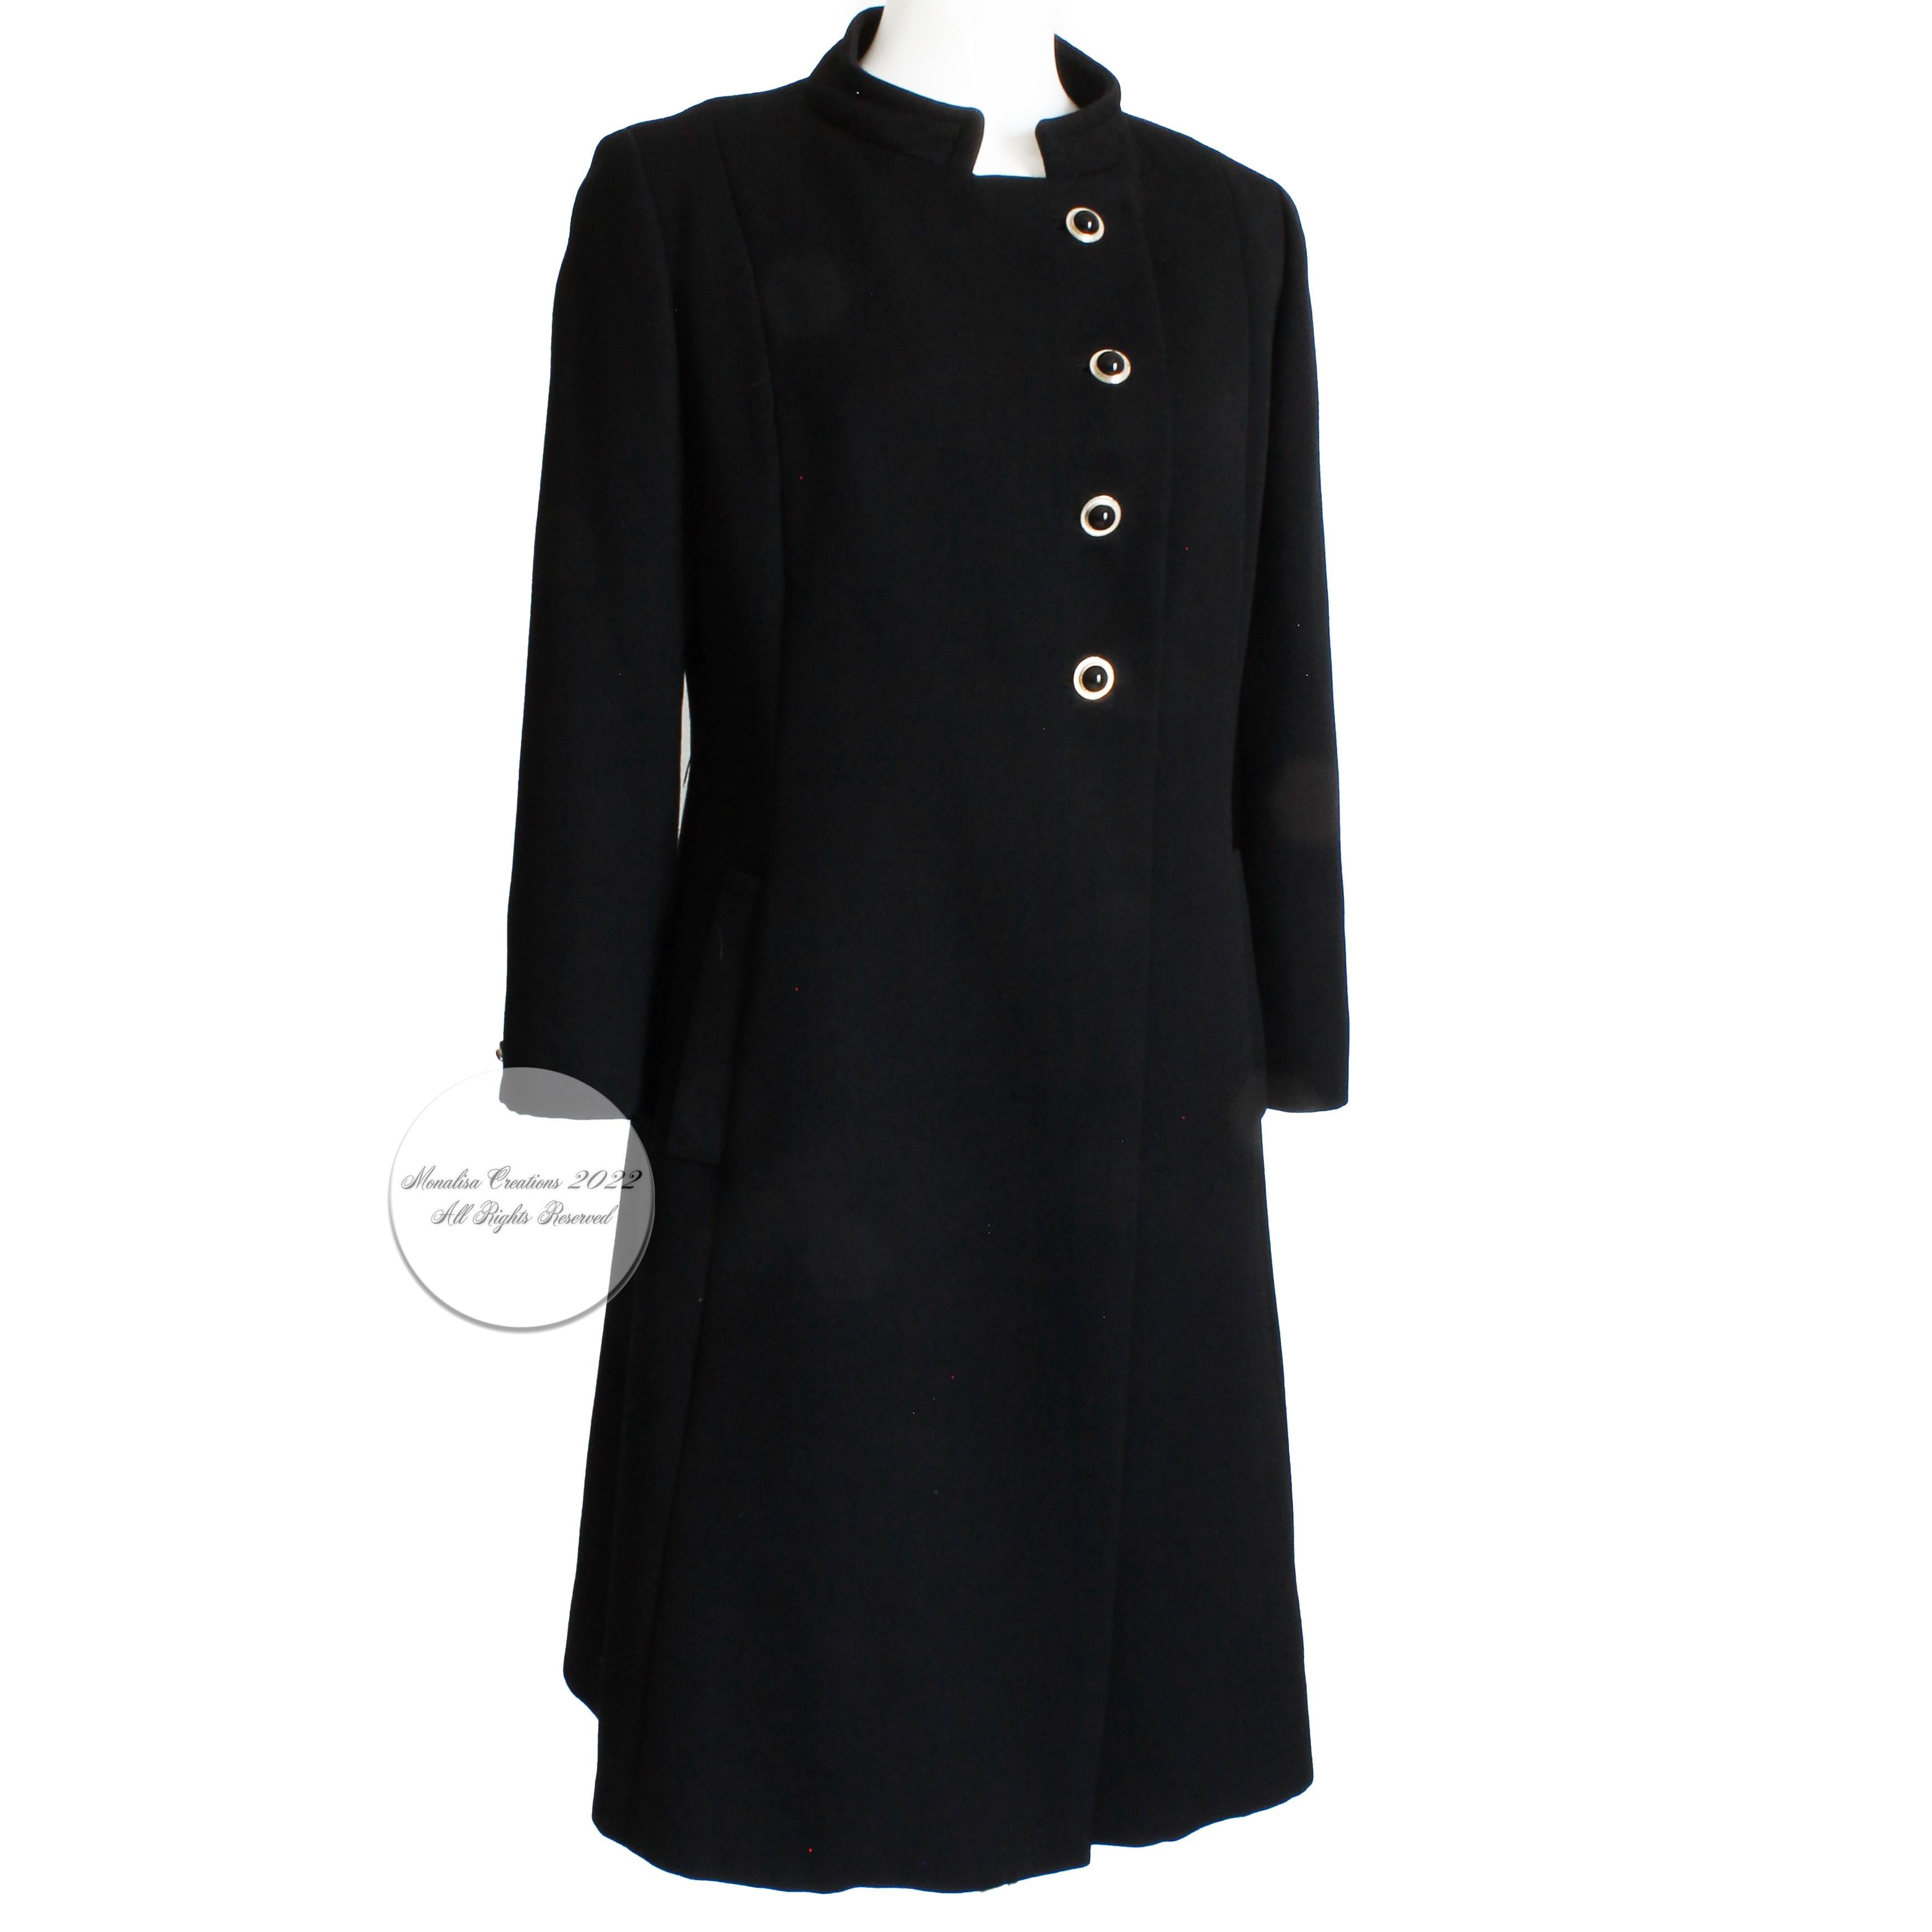 Black 50s Wool Coat by Zelinka Matlick Military Style Tailored Sculptural Collar Rare For Sale